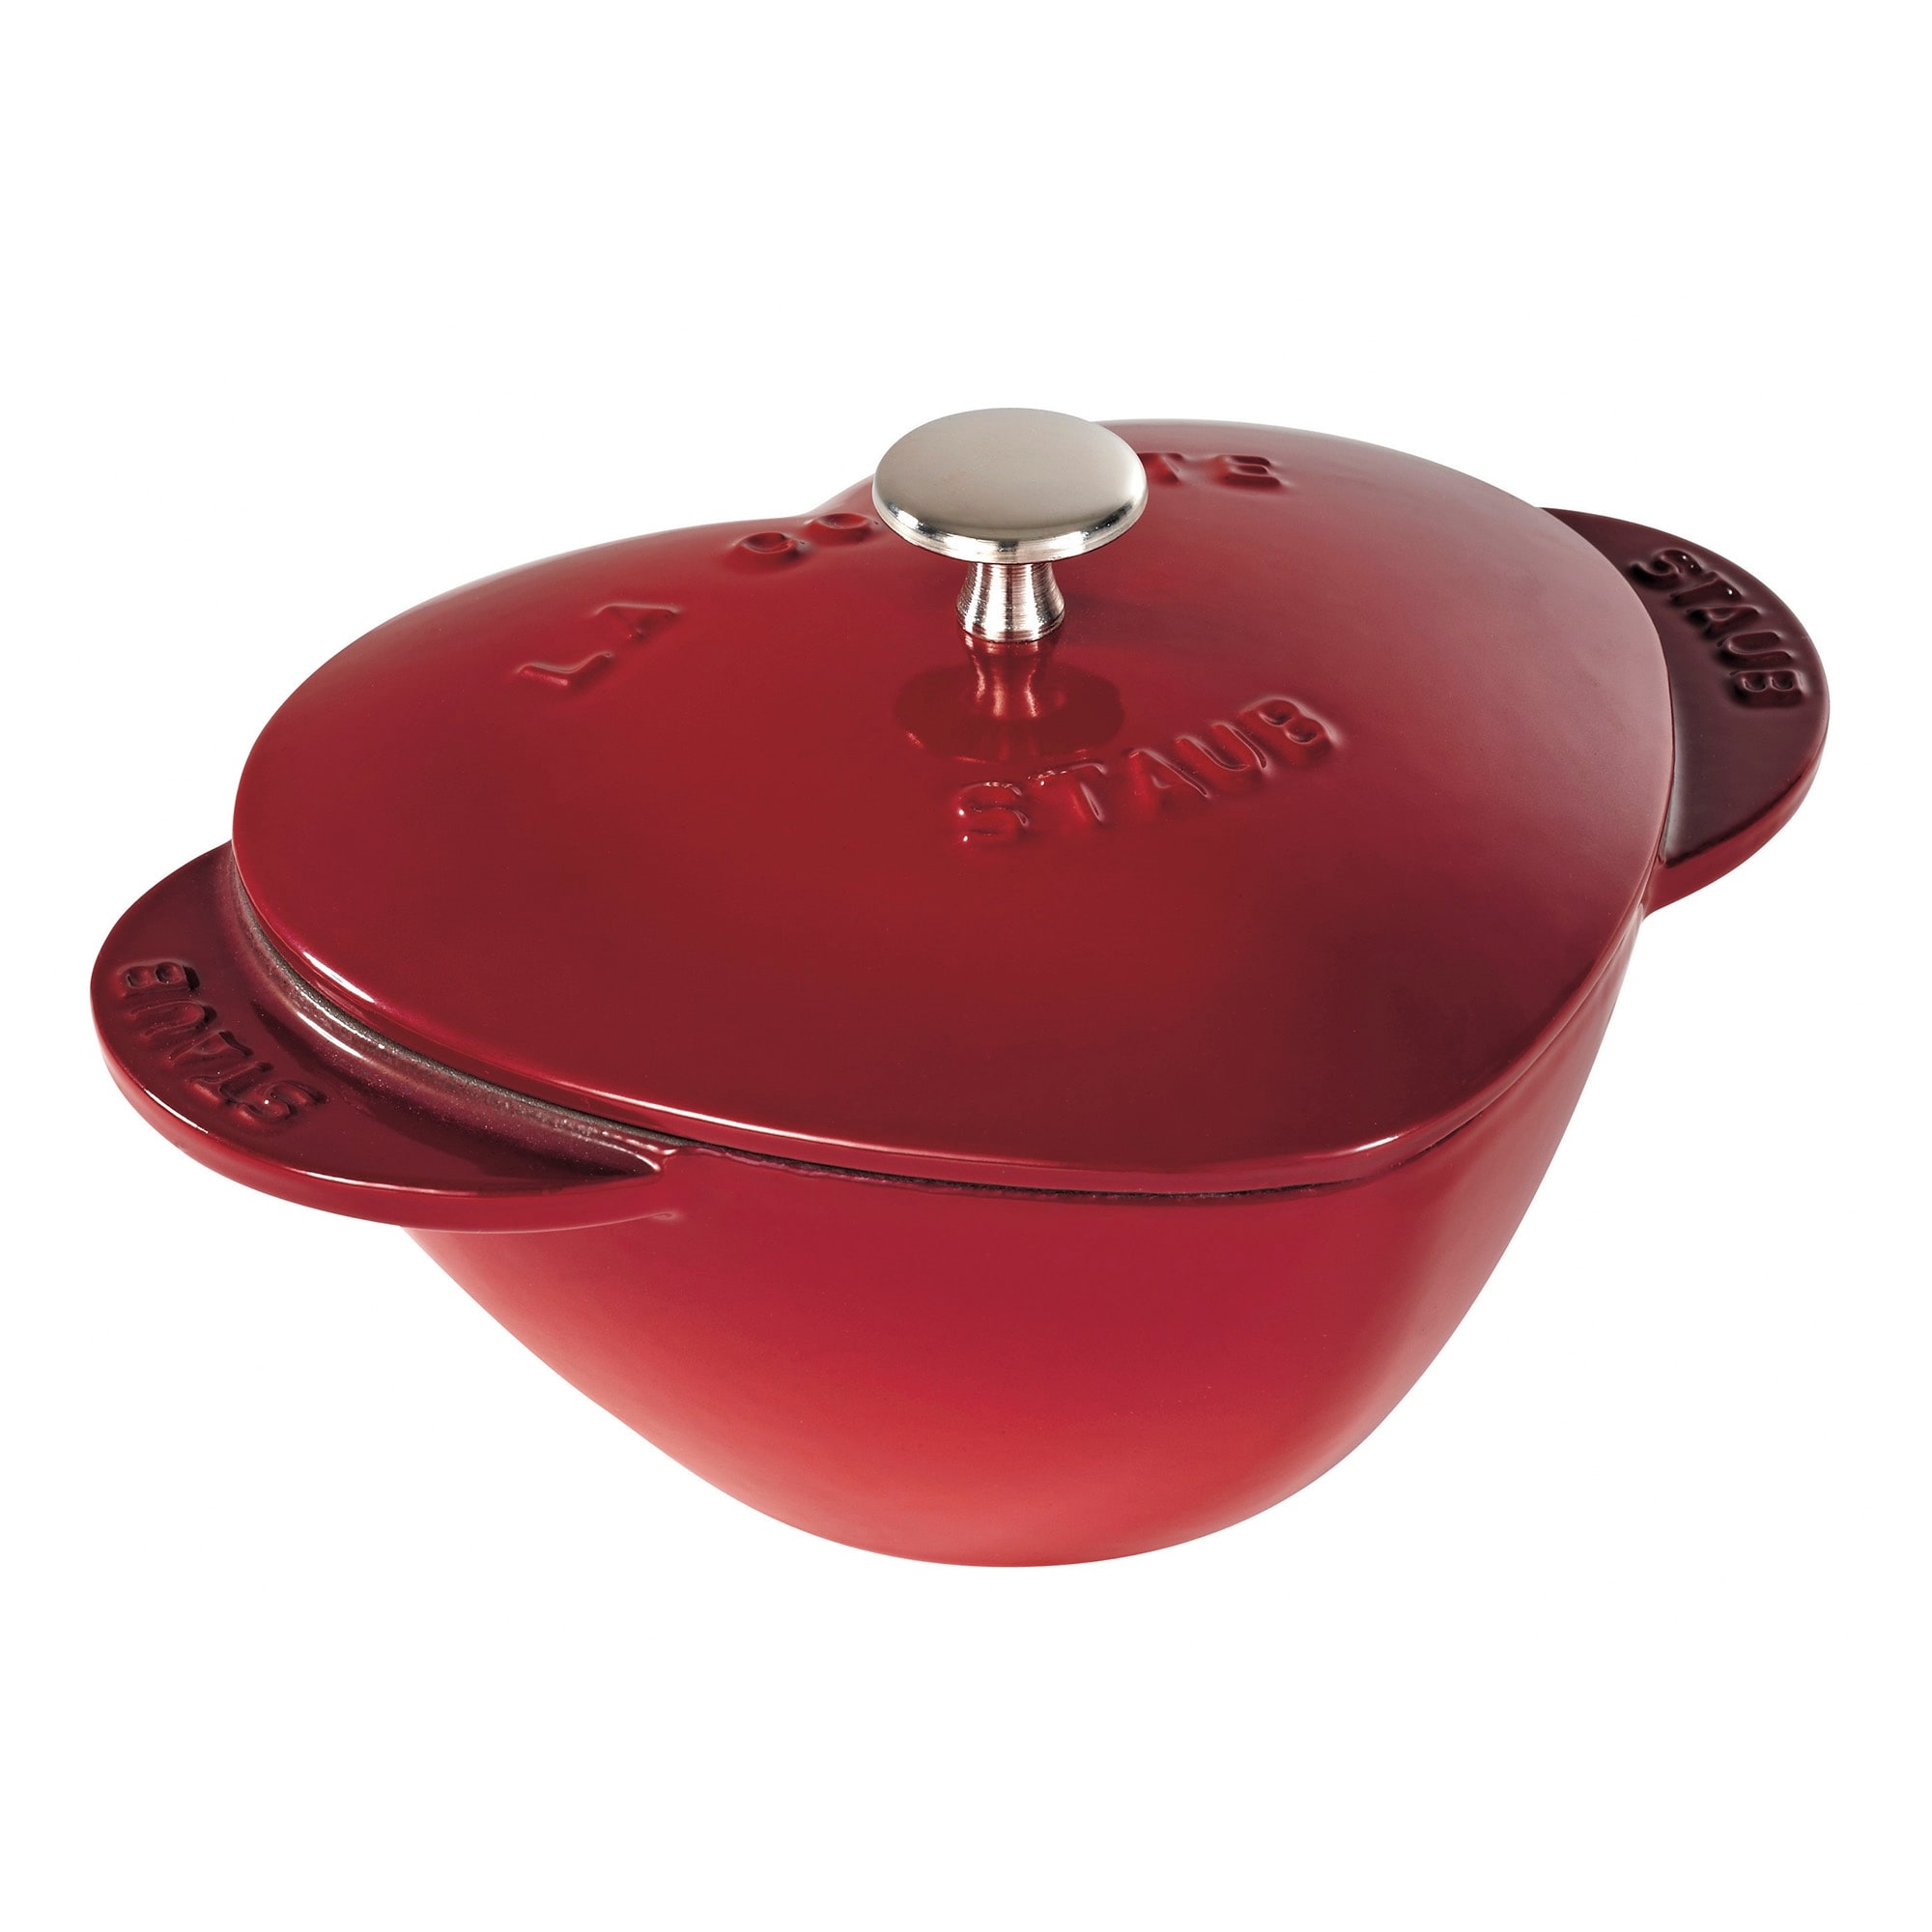 https://ak1.ostkcdn.com/images/products/is/images/direct/811c361a258efd614ce13337aa114dabceb77df3/Staub-Cast-Iron-1.75-qt-Heart-Cocotte---Cherry.jpg